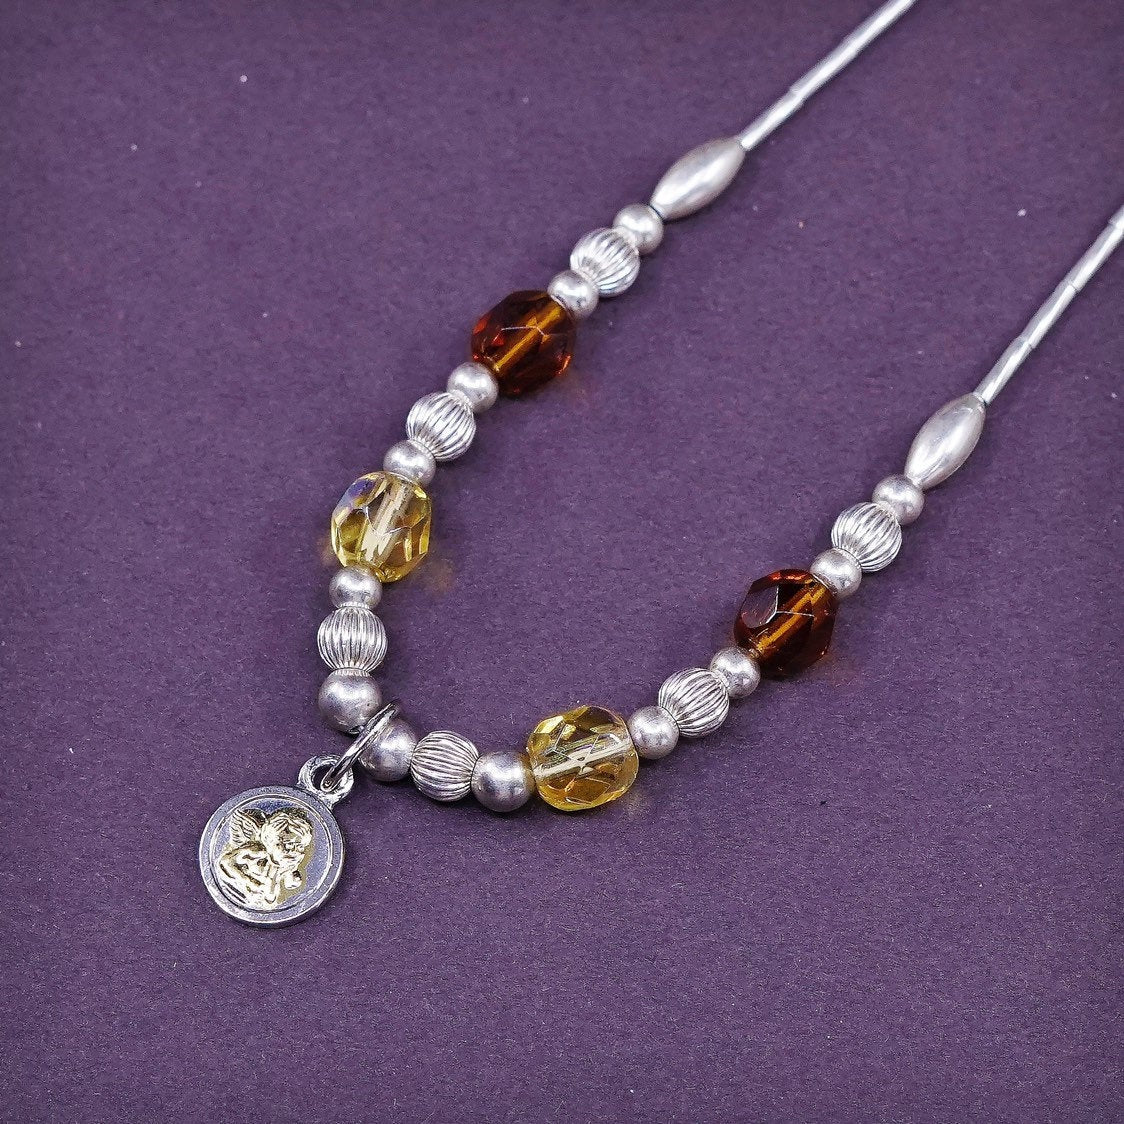 16”, Sterling silver necklace, 925 liquid chain w/ amber beads N angle pendant